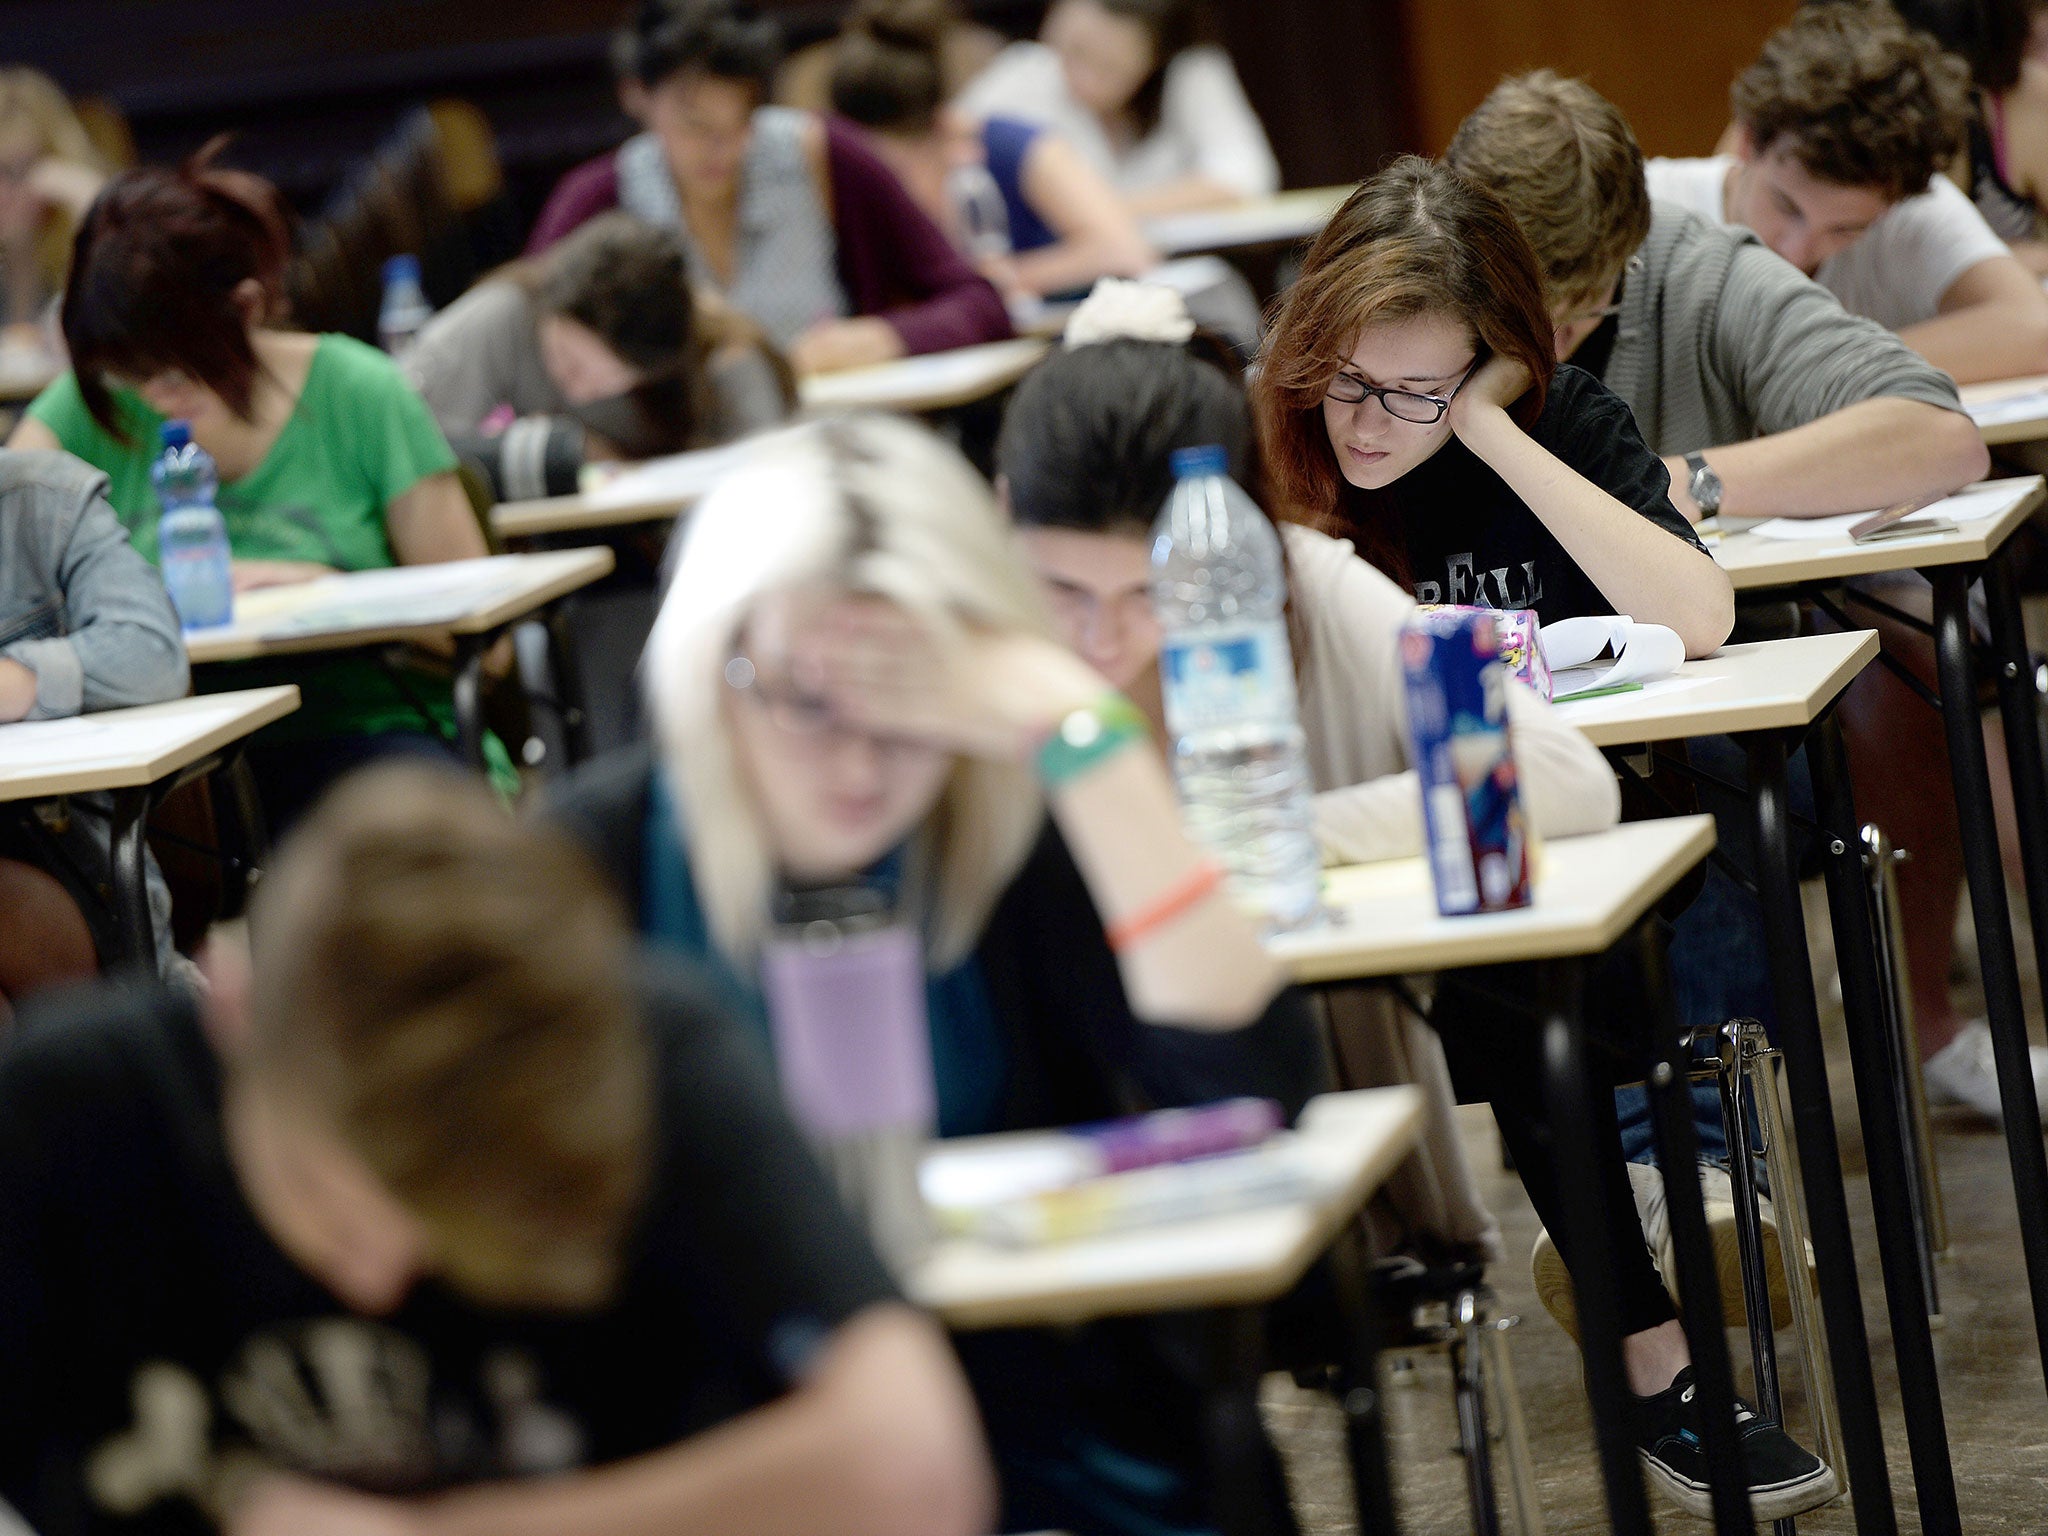 Students took to Twitter to say they'd aced a chemistry exam